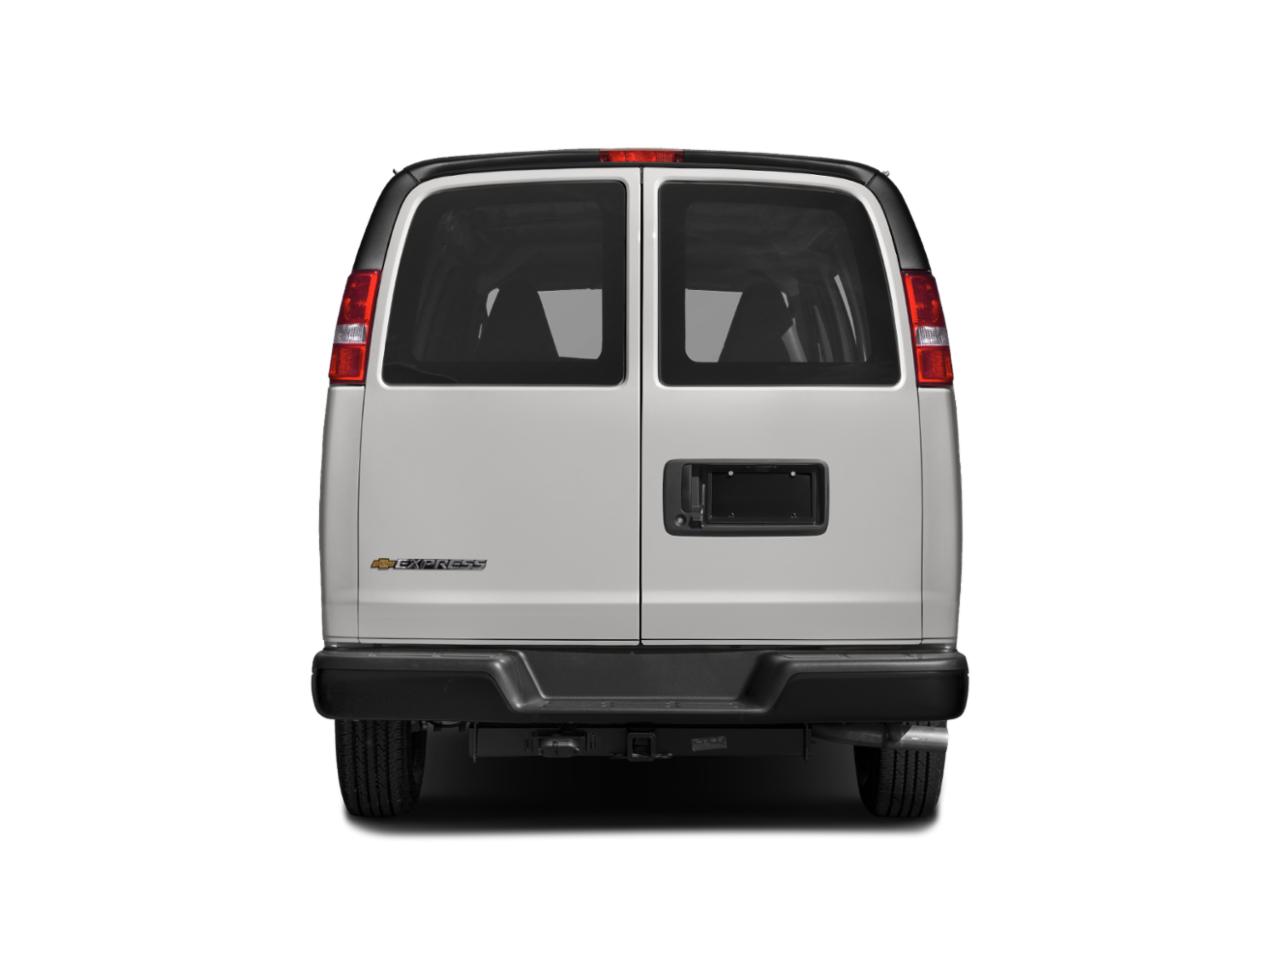 2020 Chevrolet Express Cargo Van lease $829 Mo $0 Down Leases Available